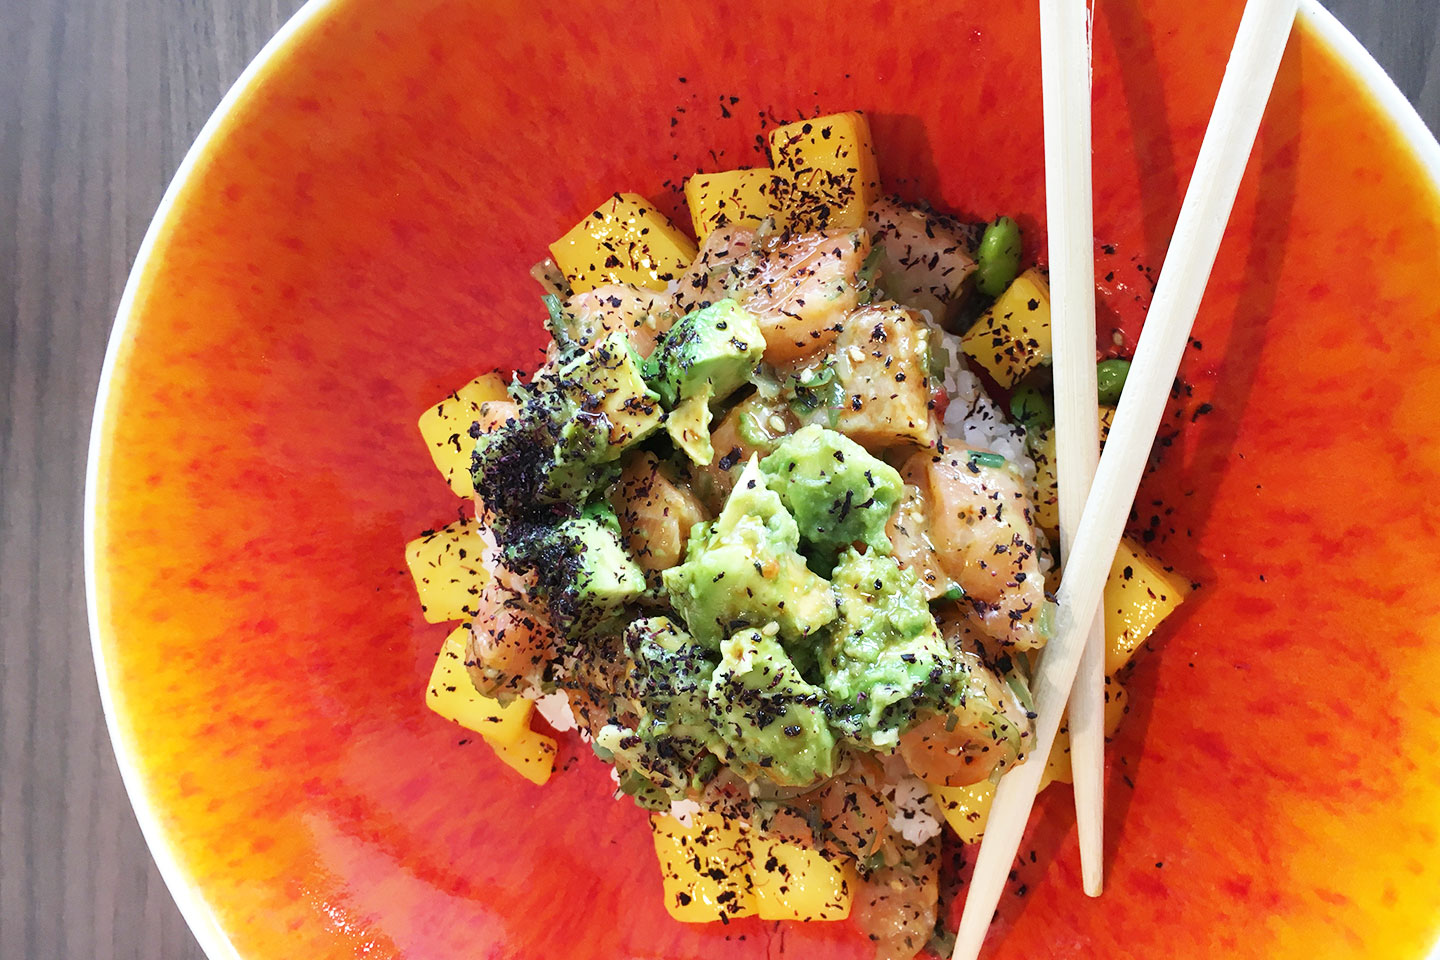 What's behind the poke bowl trend?